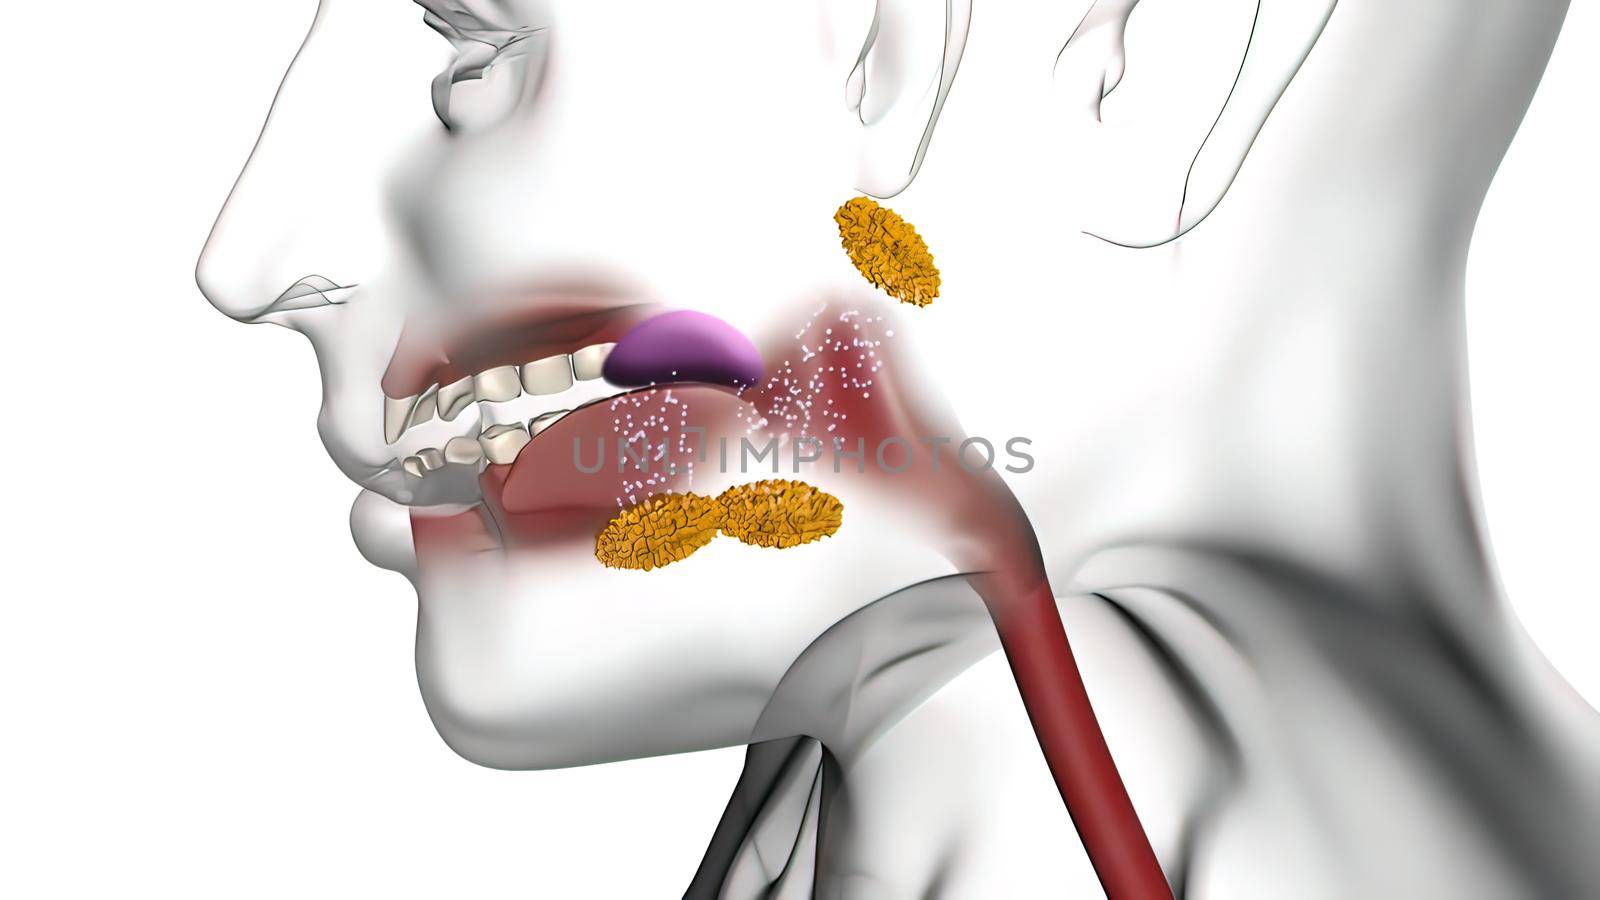 Enzymes in the mouth help break down food by creativepic